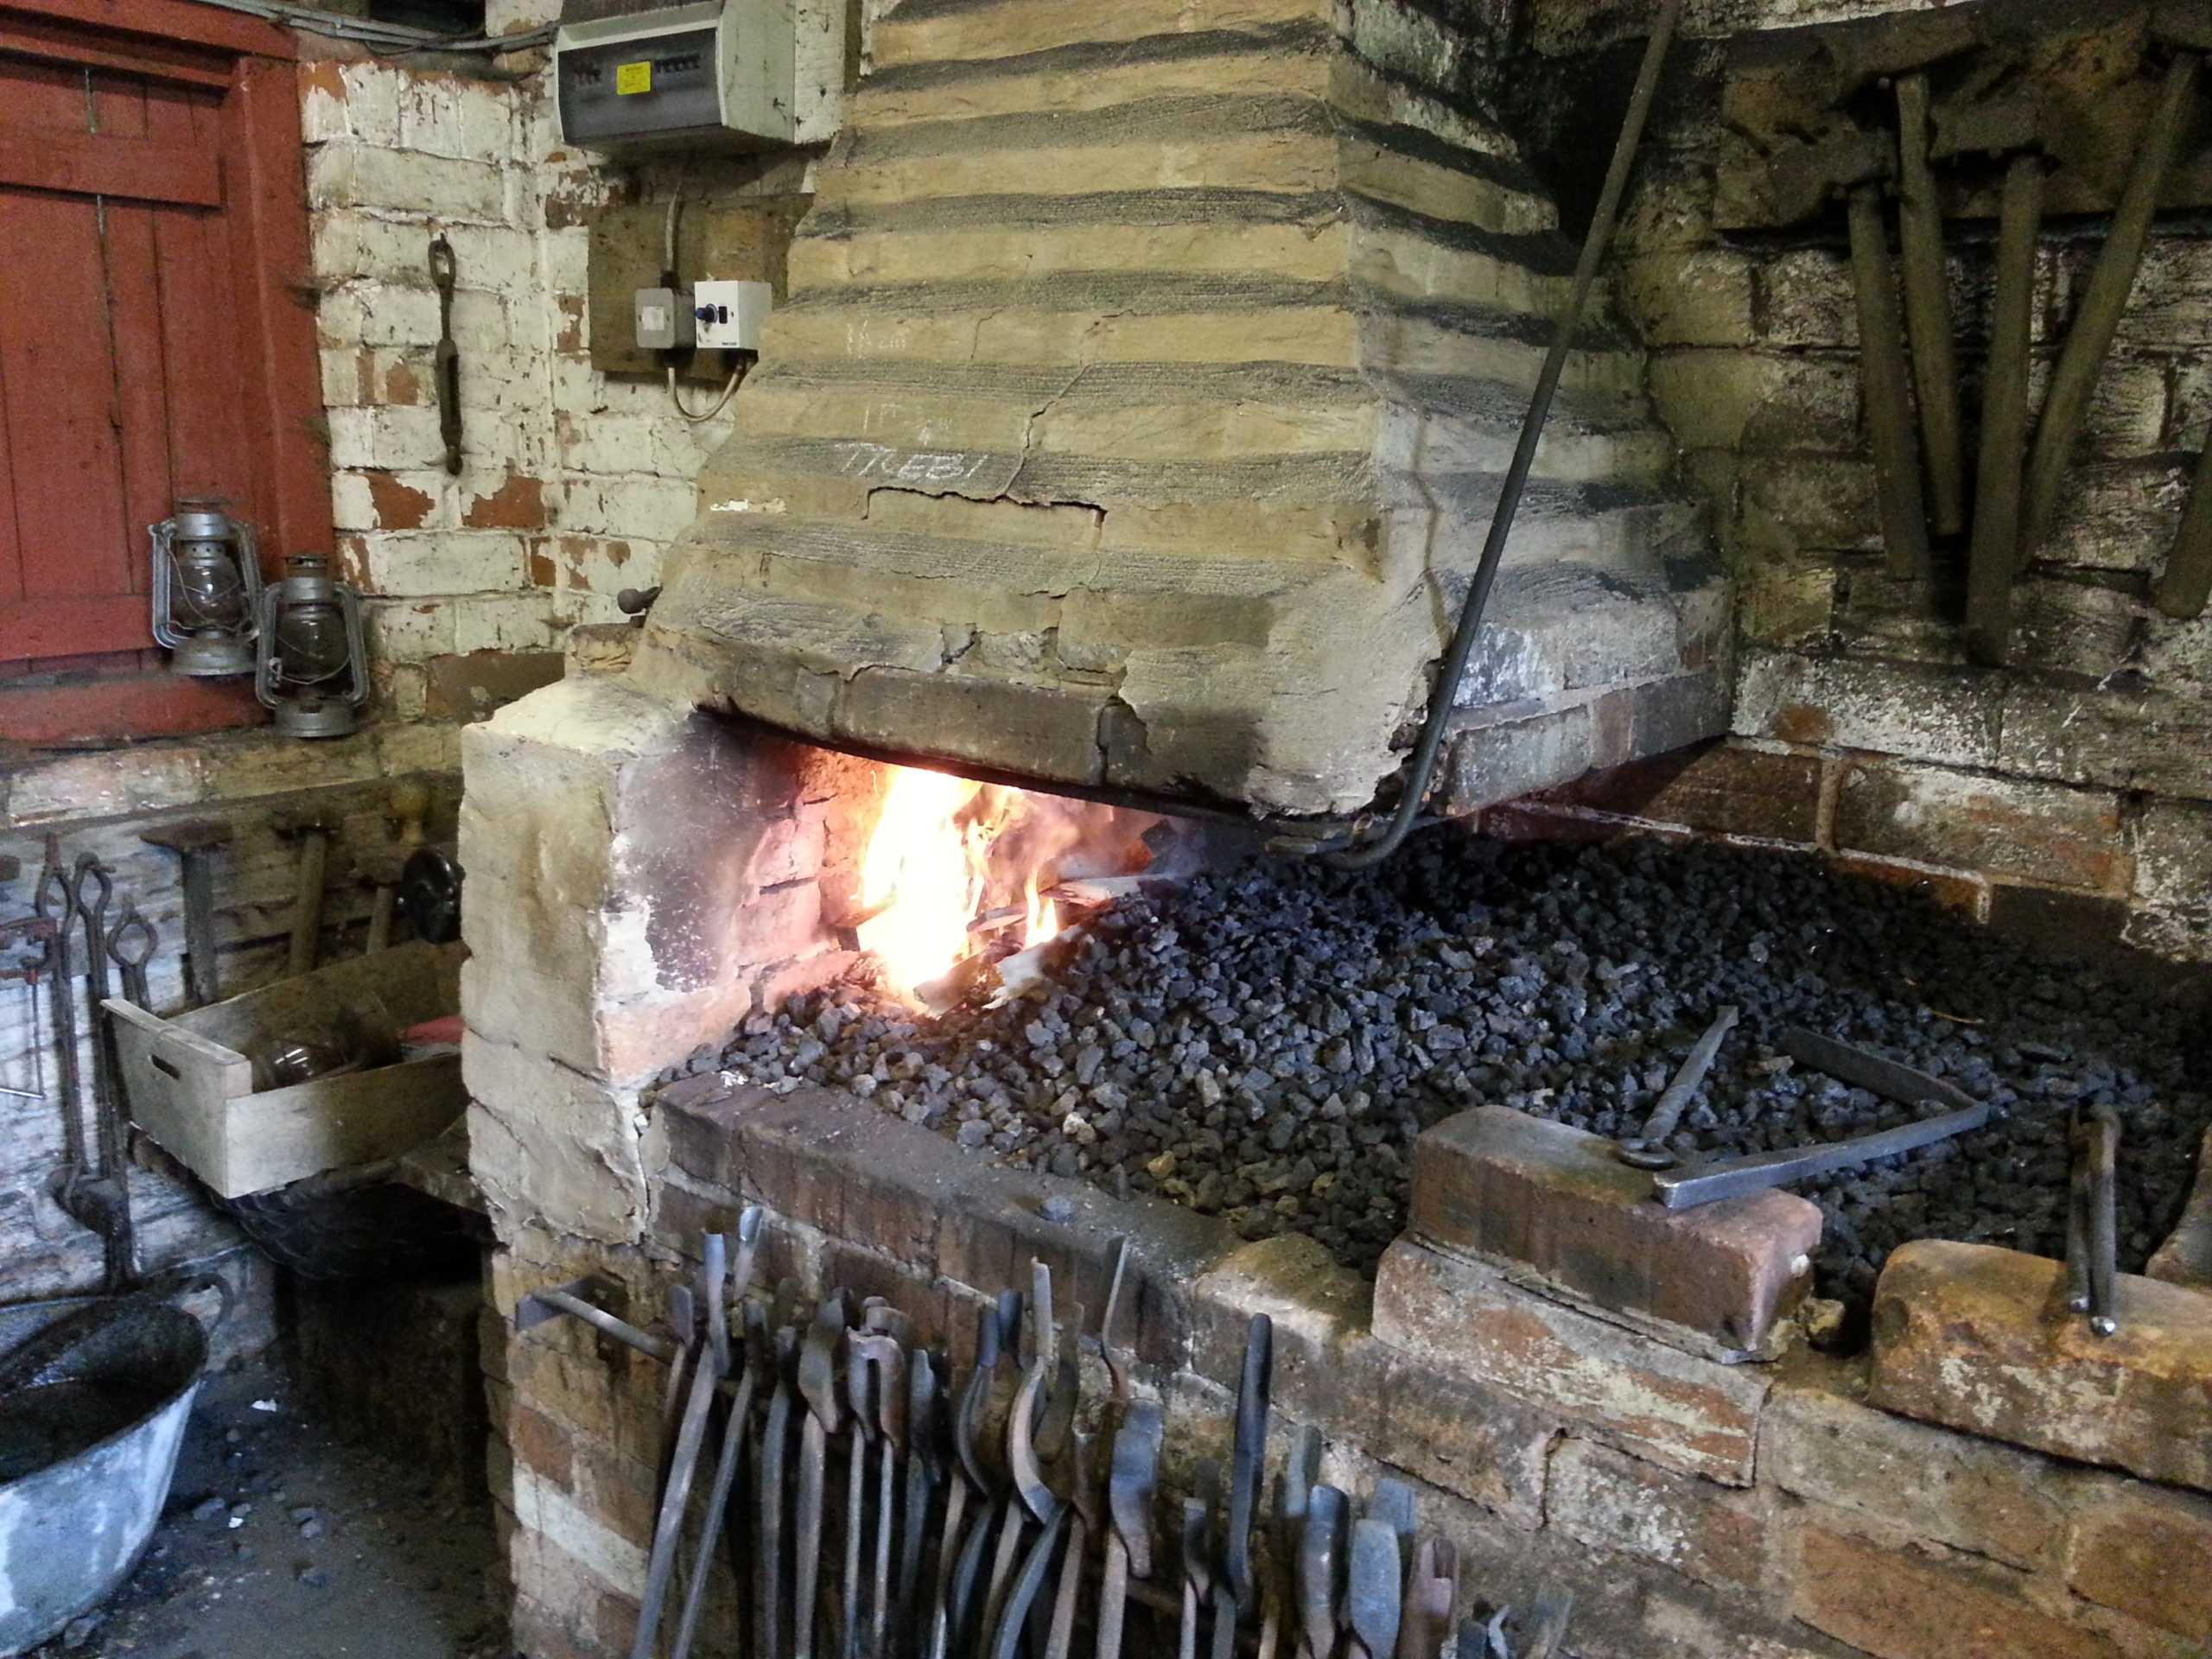 A blacksmith's hearth: the fire is just lit.